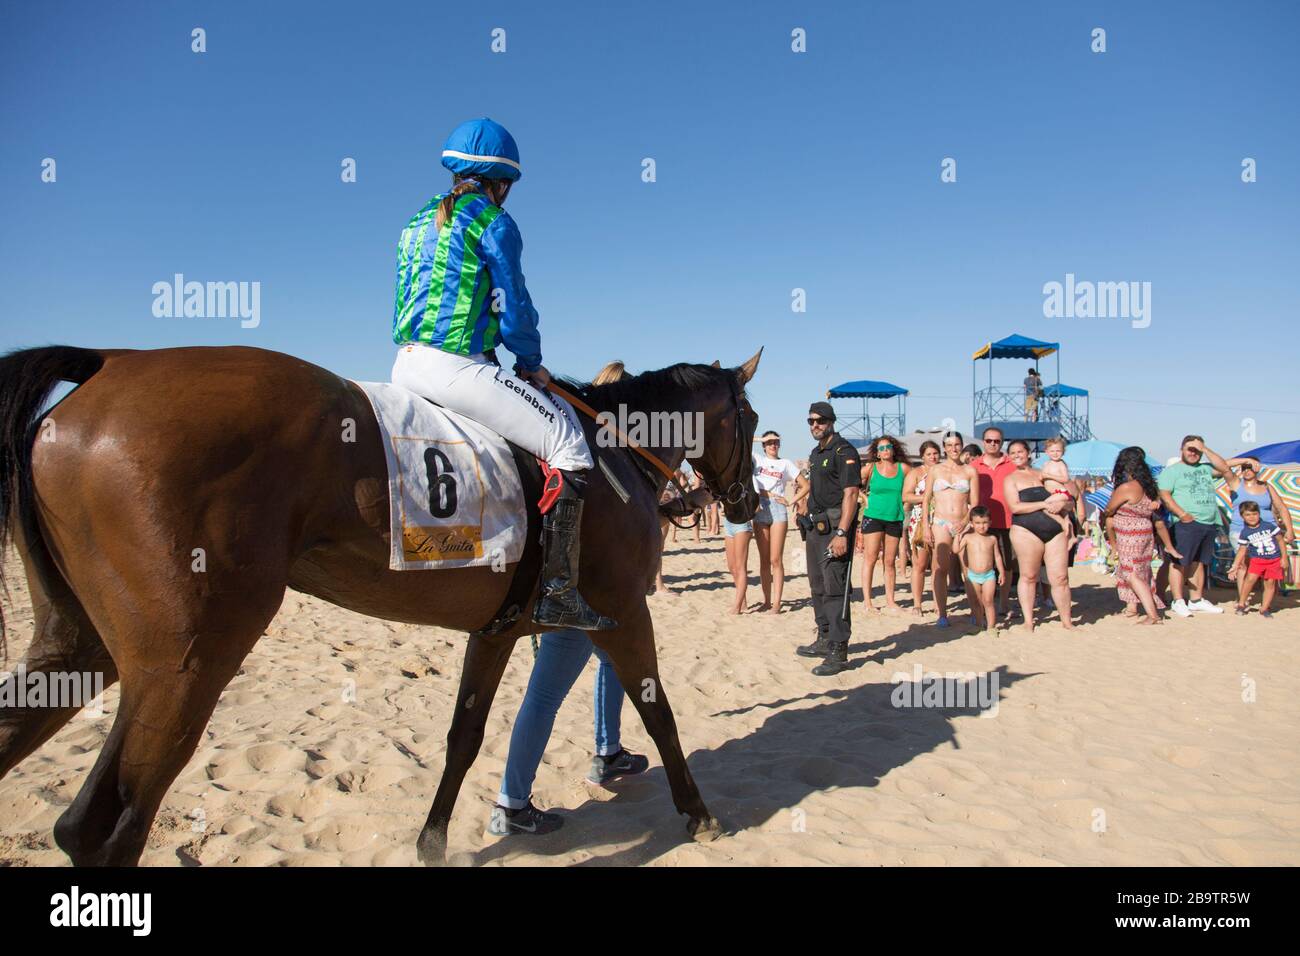 A female mounted jockey returns to the enclosure after a race during the annual August horseraces on the beach at Sanlucar de Barrameda, Cadiz, Spain Stock Photo